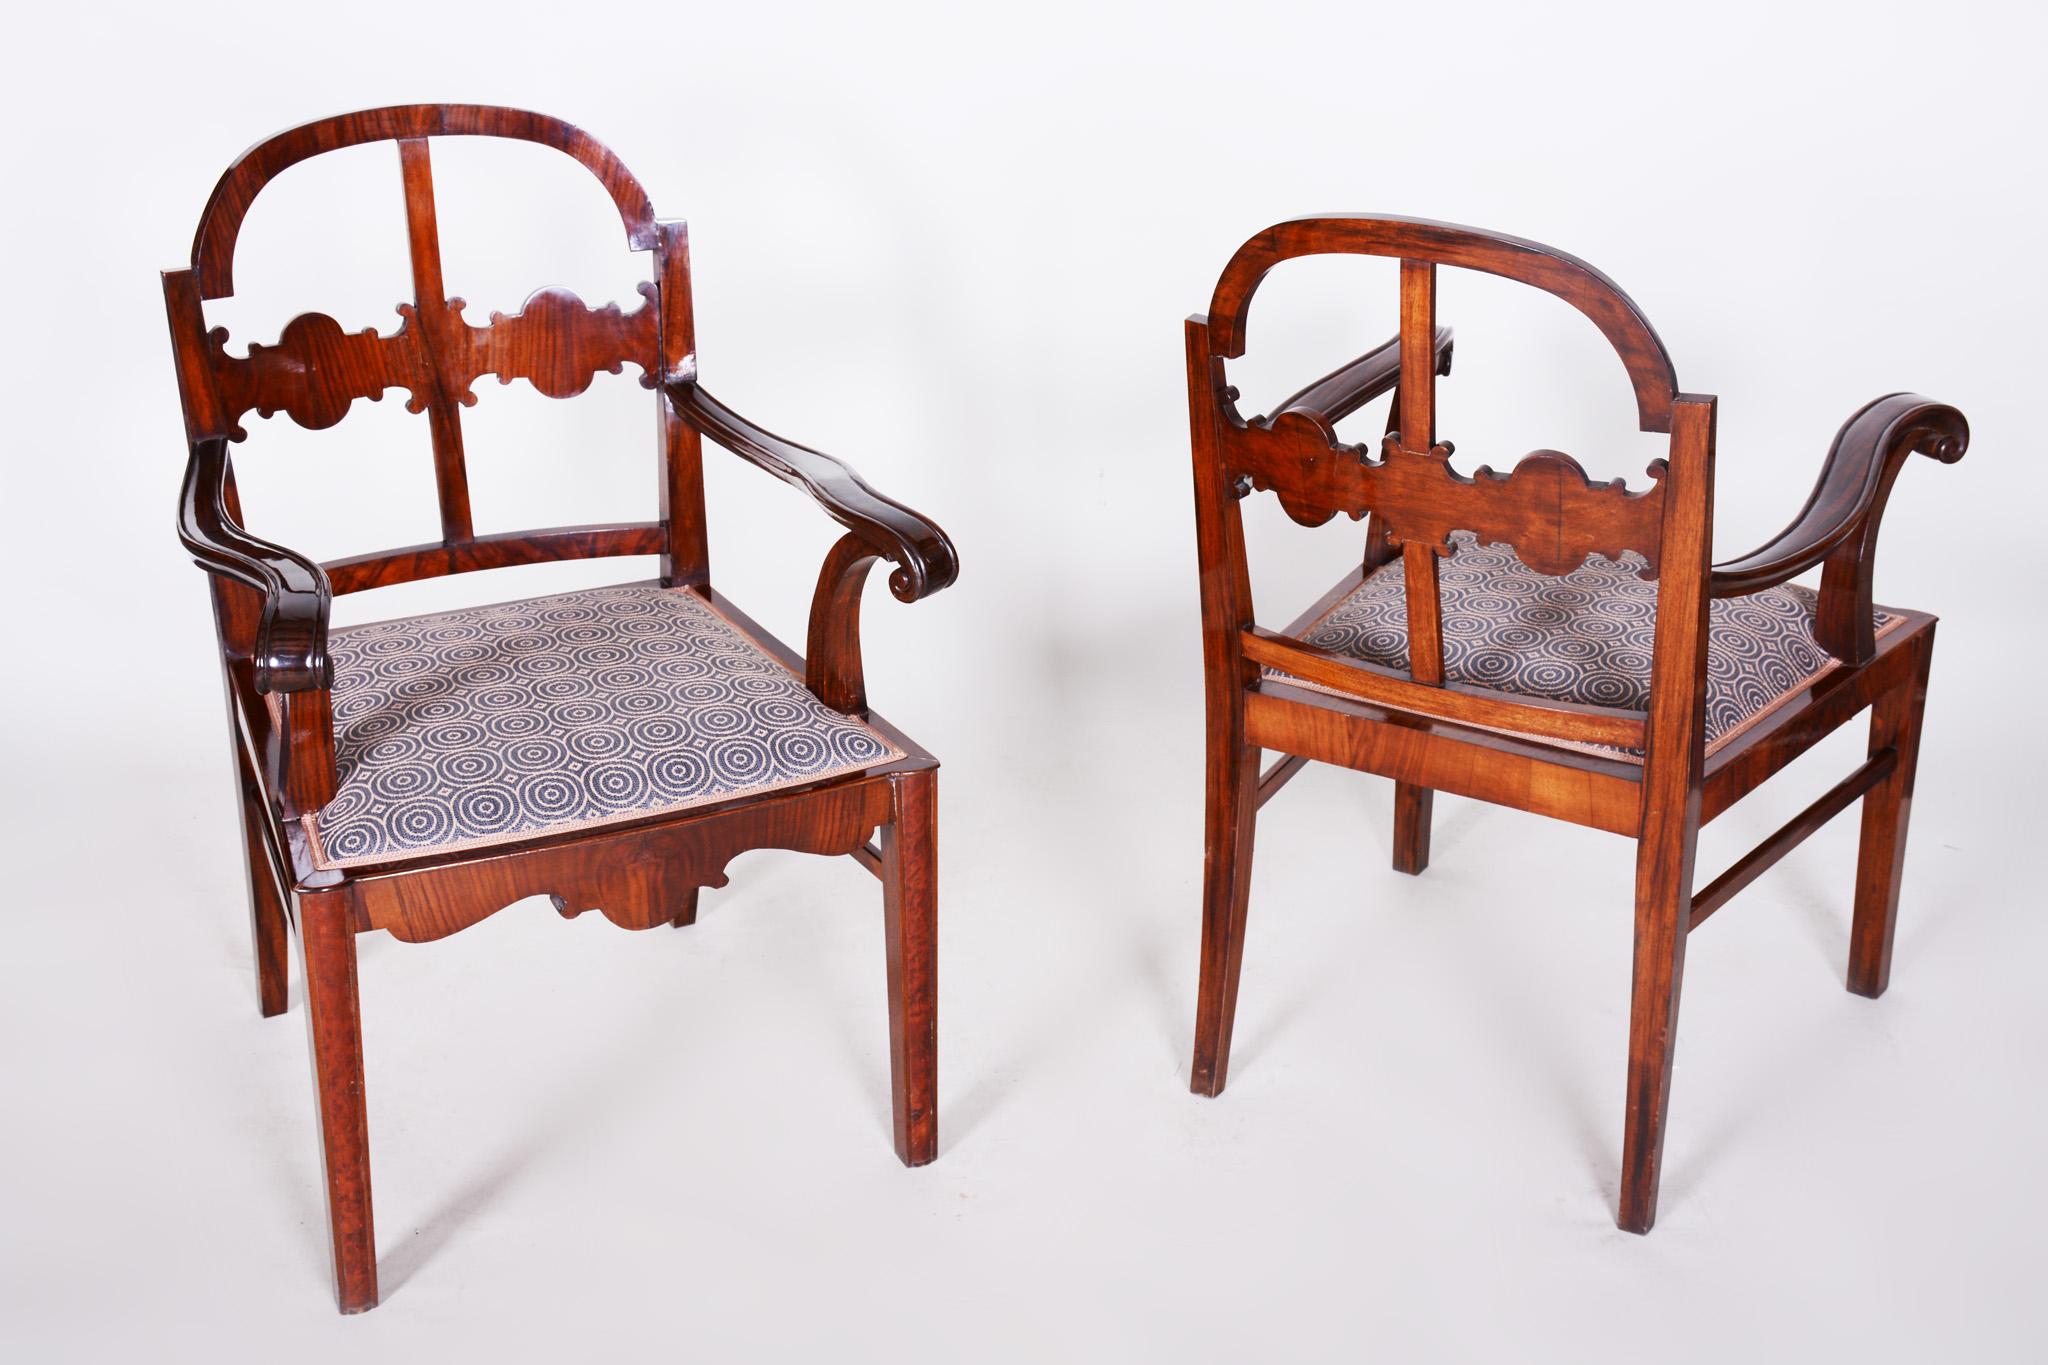 Walnut Art Deco Seating Set, 2 Armchairs and 4 Chairs, Shellac Polish, 1920s For Sale 6